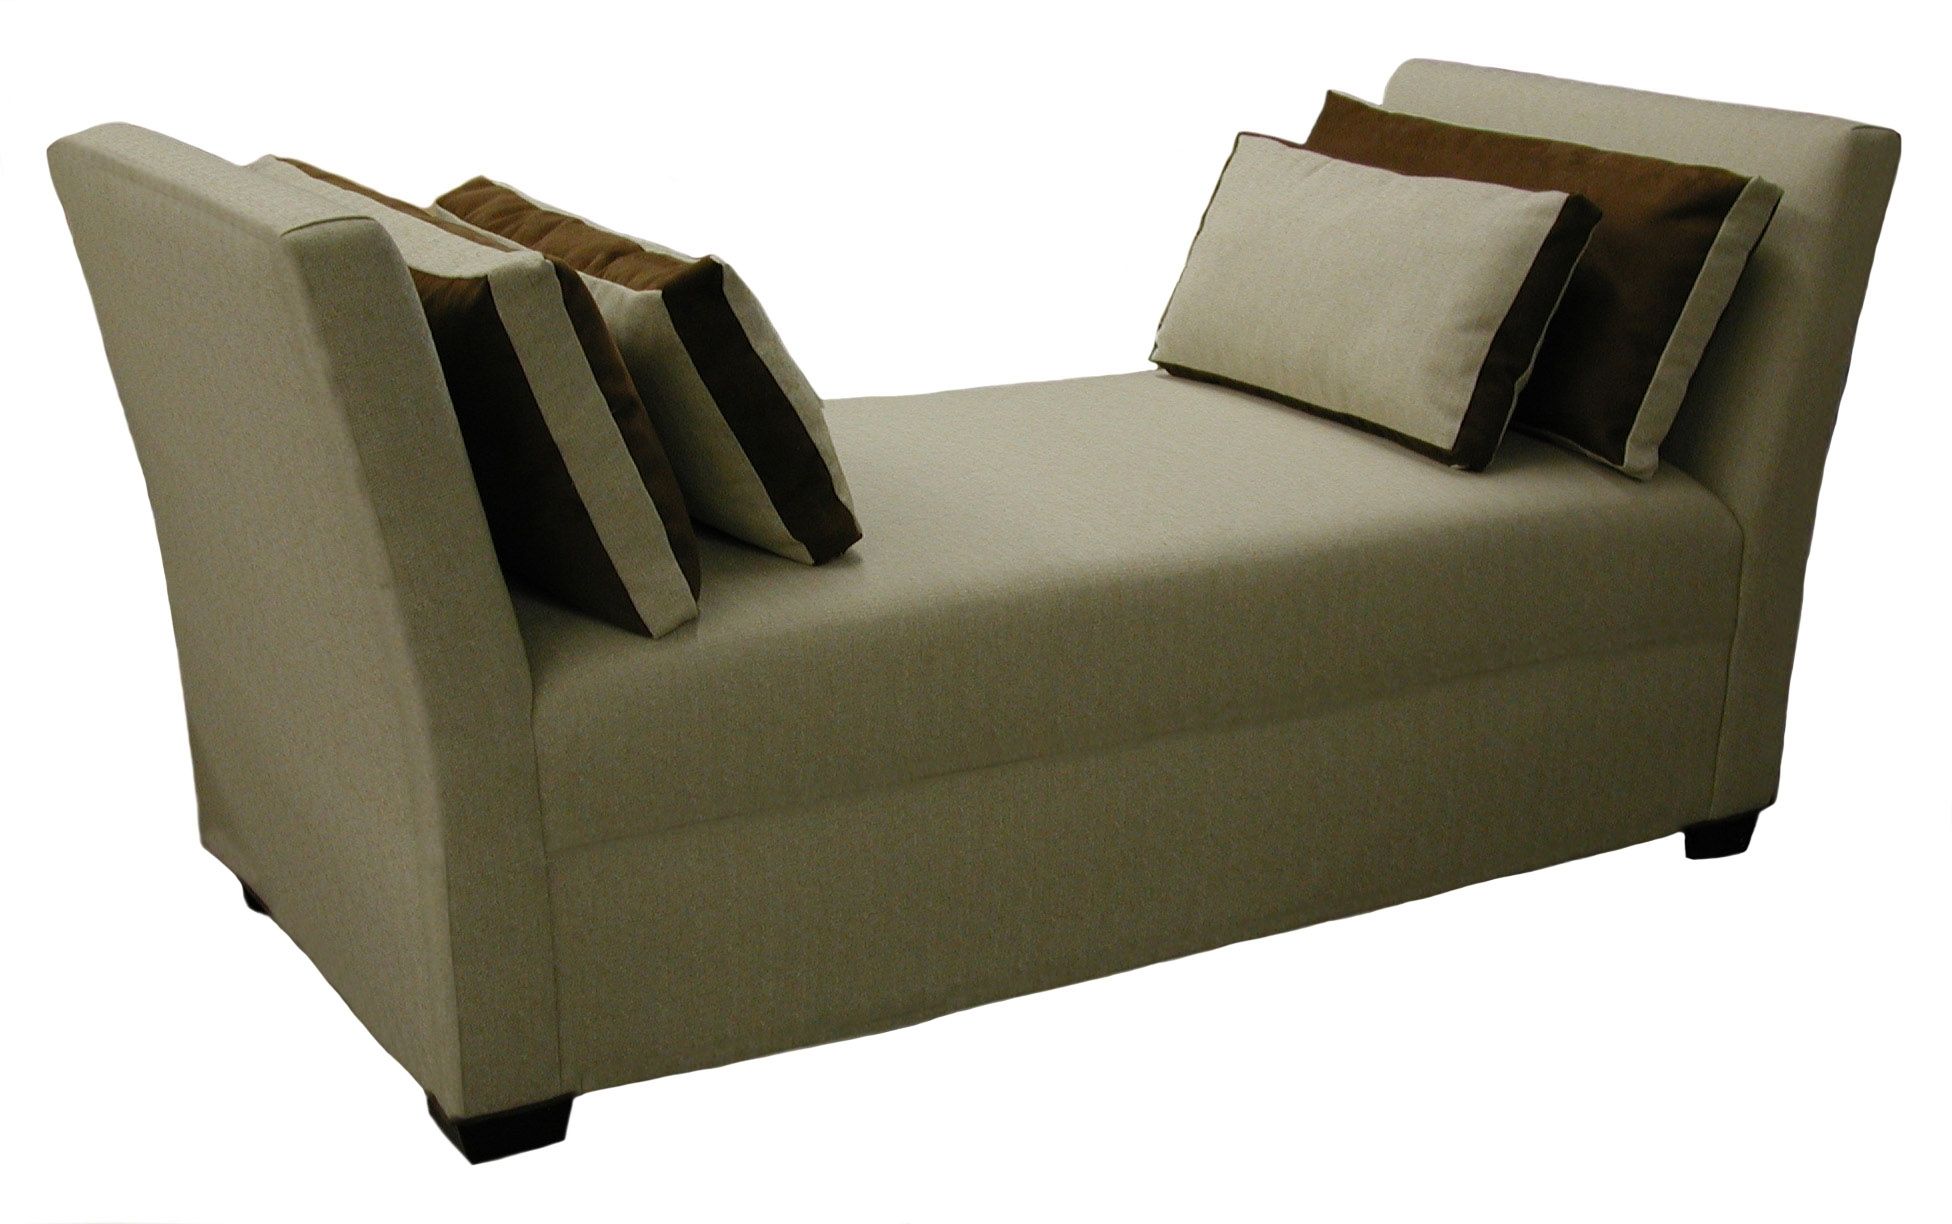 Chaises Lounge Chair Daybeds Nc Free Ship Carolina Chair For Well Liked Daybed Chaises (View 10 of 15)